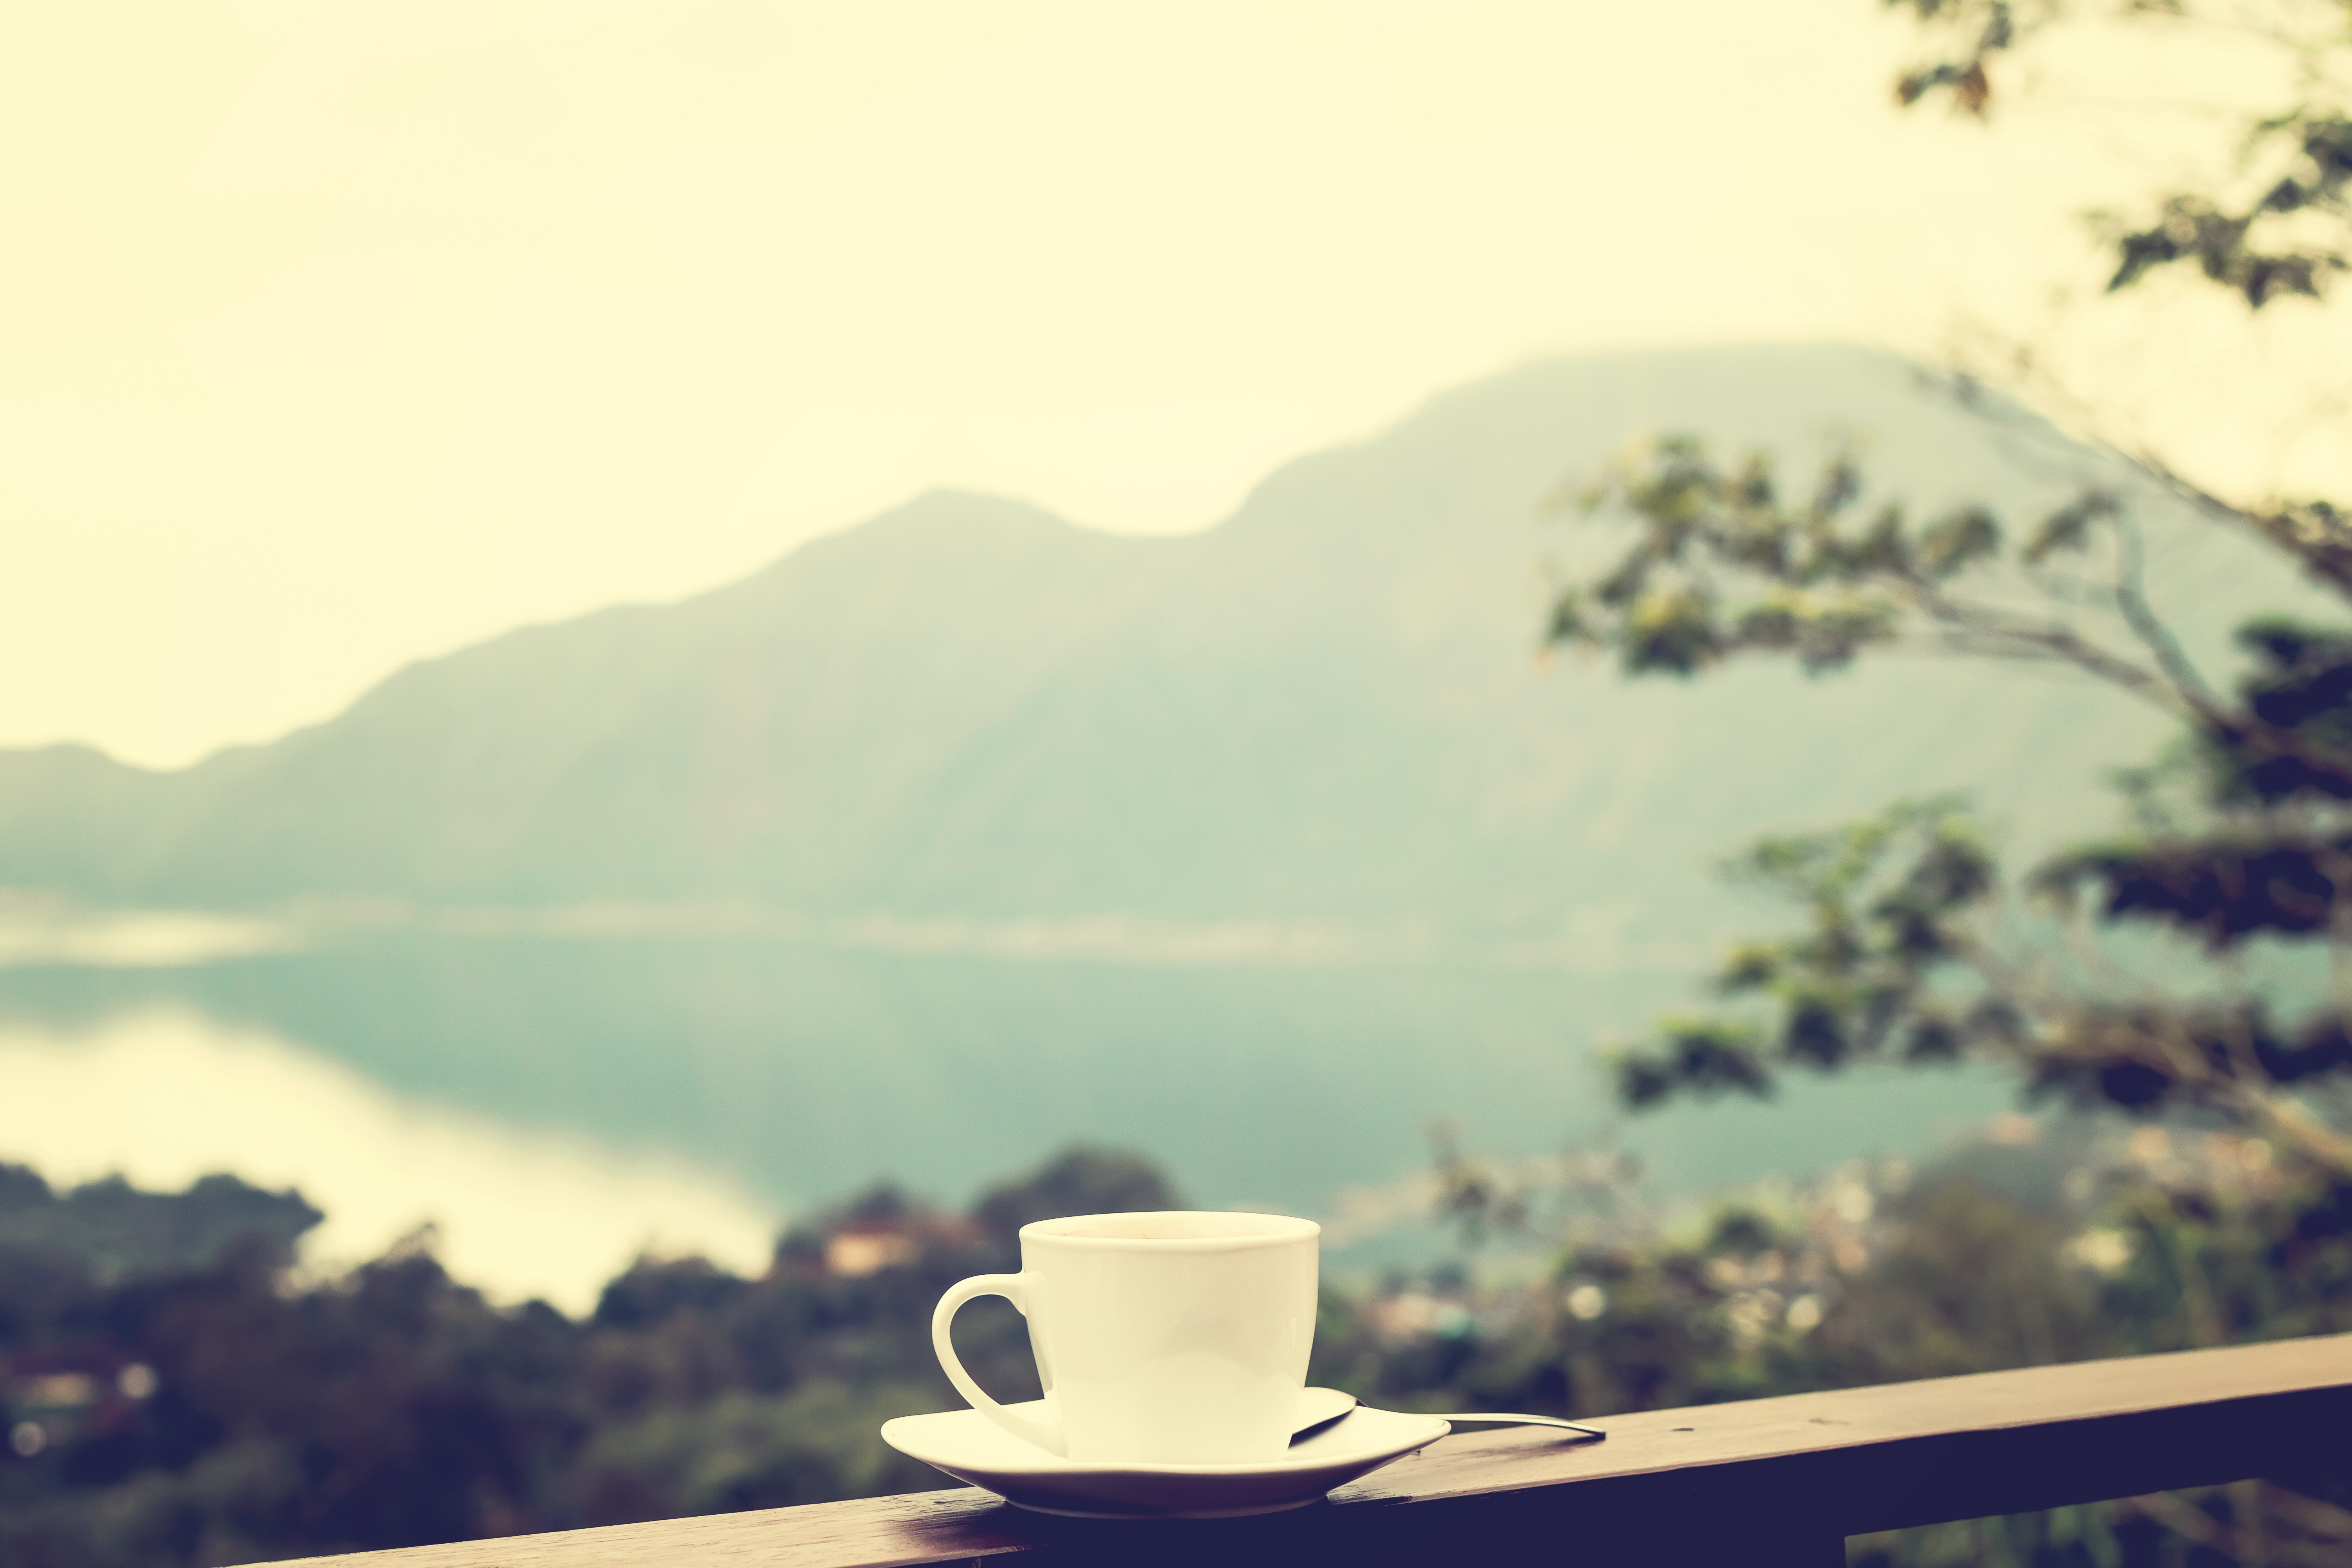 HD wallpaper freedom, mountains, privacy, seclusion, miscellanea, miscellaneous, cup, mood